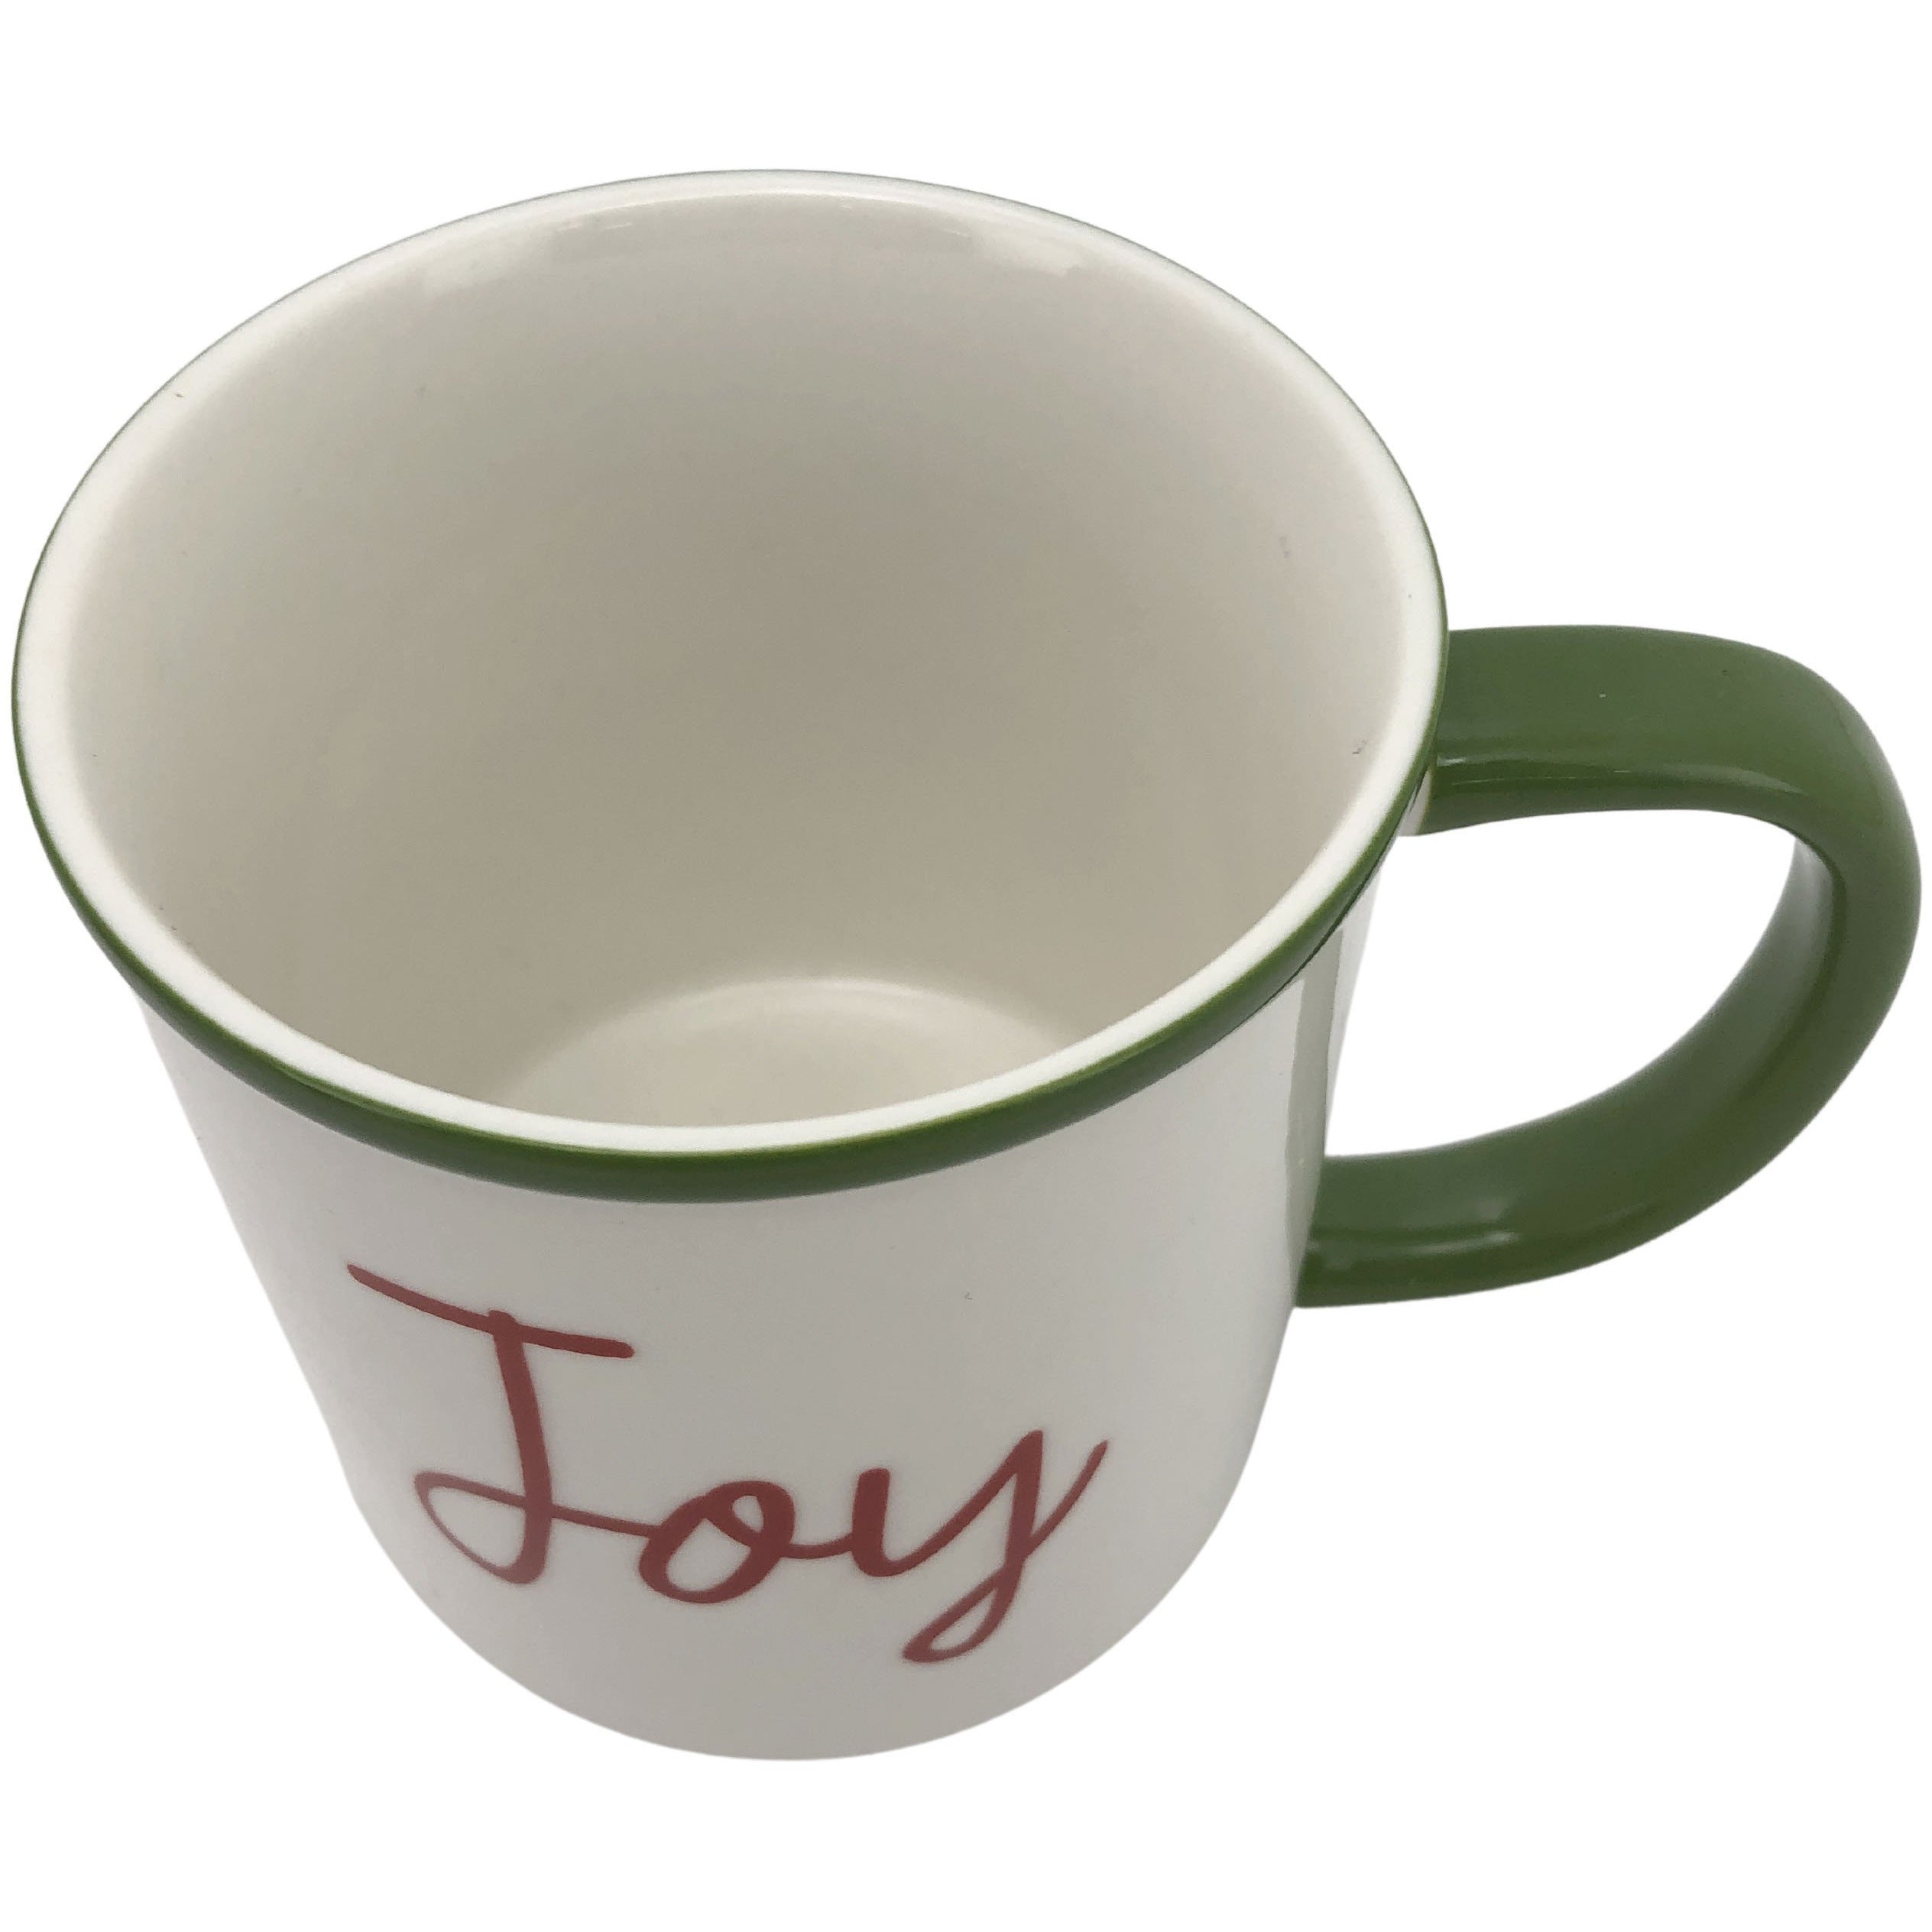 Holiday Christmas Coffee Mugs / Ceramic / Coffee Cup / "Joy" / "Holly Jolly" /"Let It Snow" / "Merry Christmas"